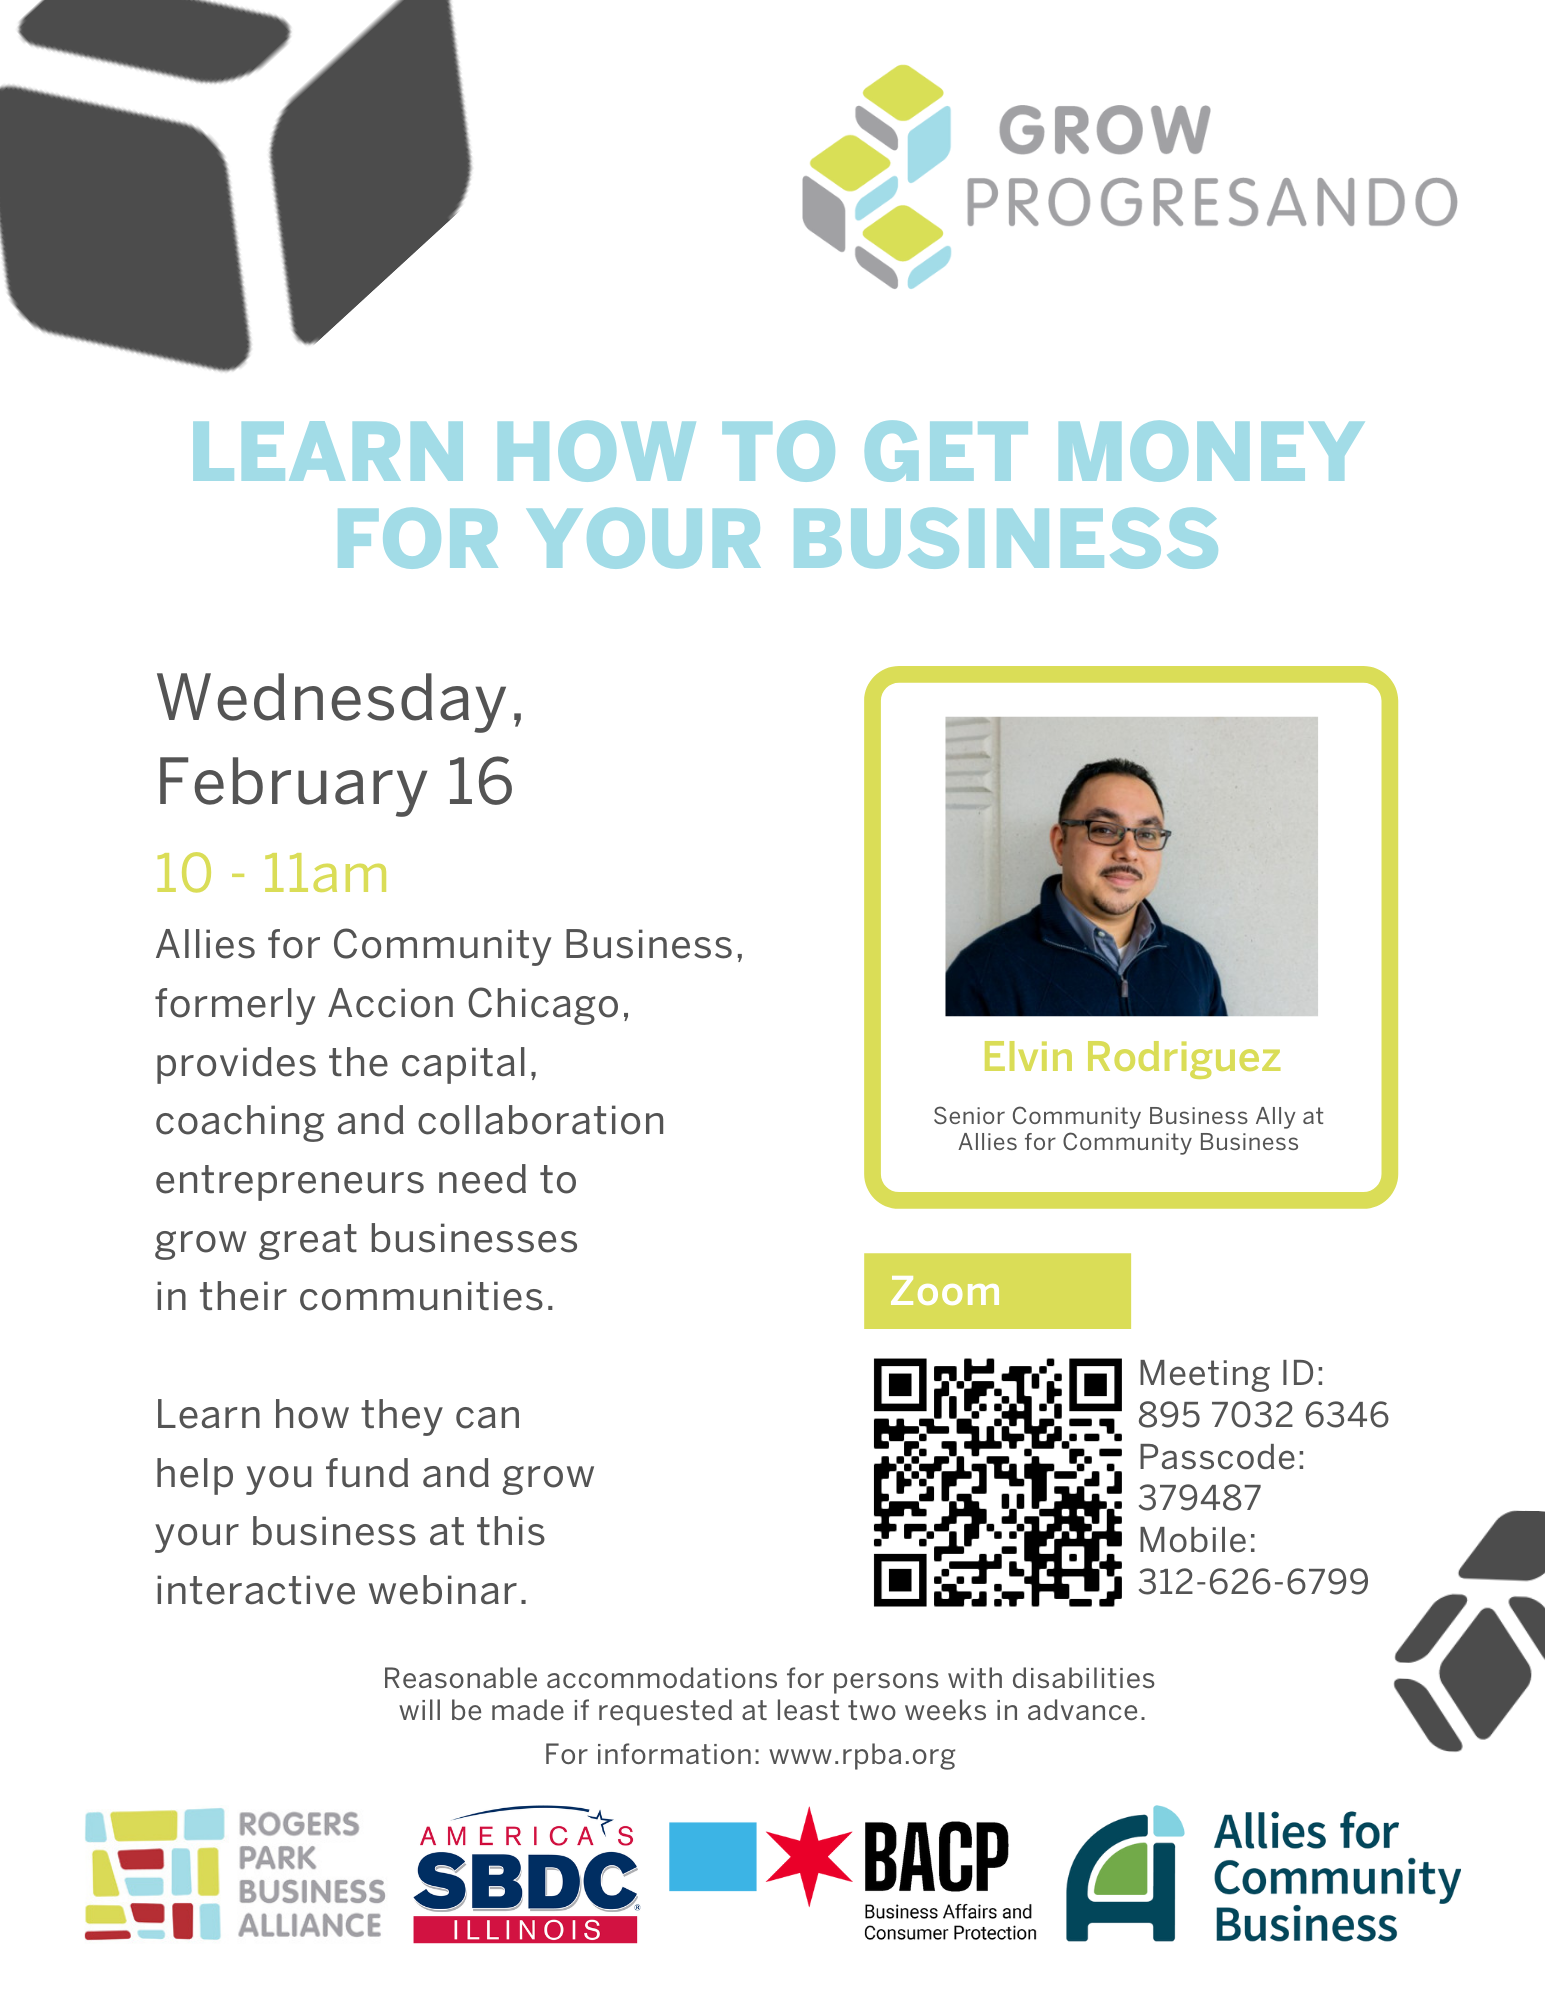 Capital Access | Learn How to Get Money for Your Business, rogers-park-business-alliance